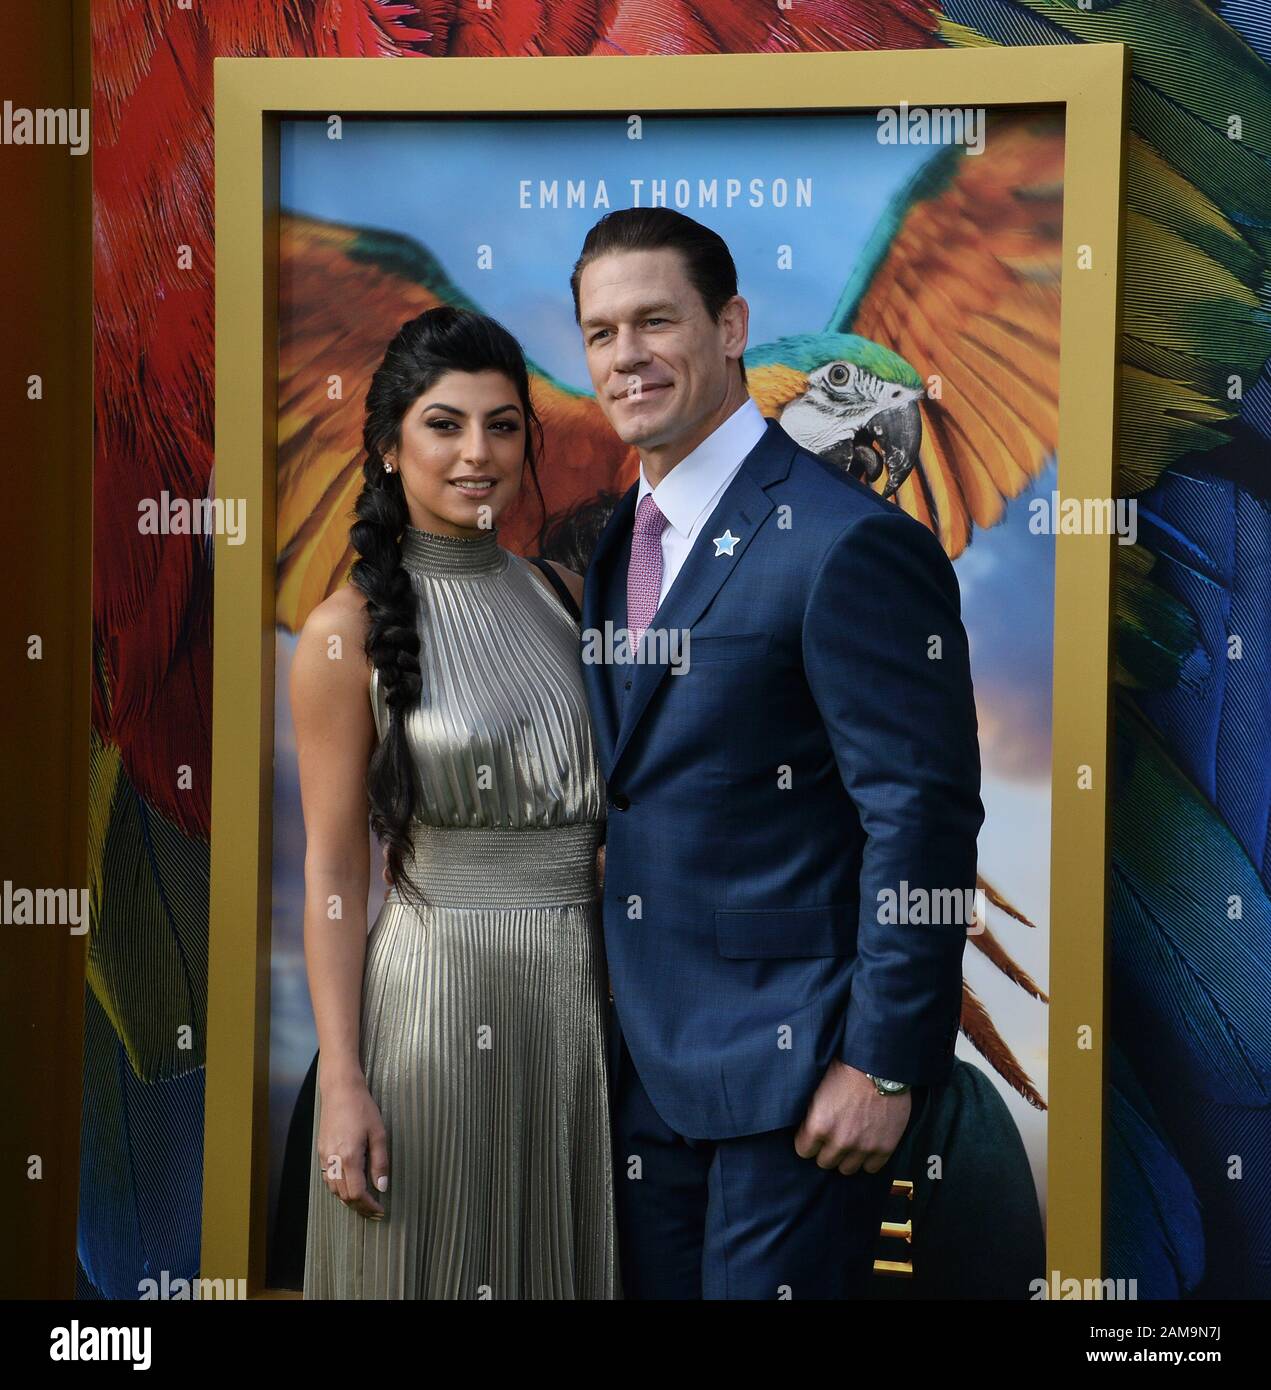 Los Angeles, United States. 12th Jan, 2020. Cast member John Cena and Canadian engineer Shay Shariatzadeh attend the premiere of the motion picture comedy 'Dolittle' at the Regency Village Theatre in the Westwood section of Los Angeles on Saturday, January 11, 2020. Storyline: A physician discovers that he can talk to animals. Photo by Jim Ruymen/UPI. Credit: UPI/Alamy Live News Stock Photo